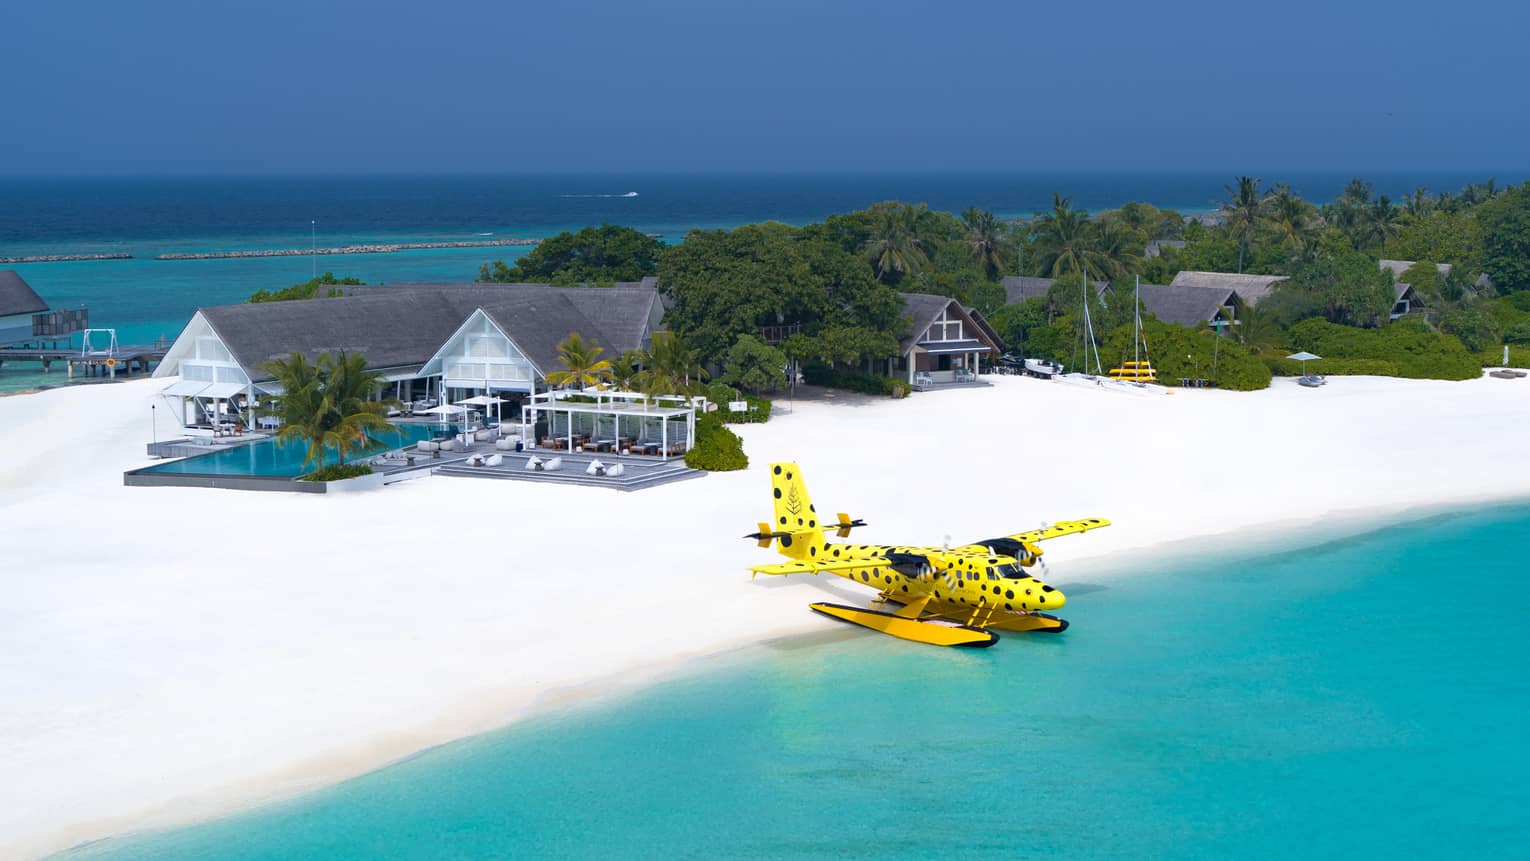 Flying Boxfish Seaplane prepares for takeoff from Resort, bungalows in background